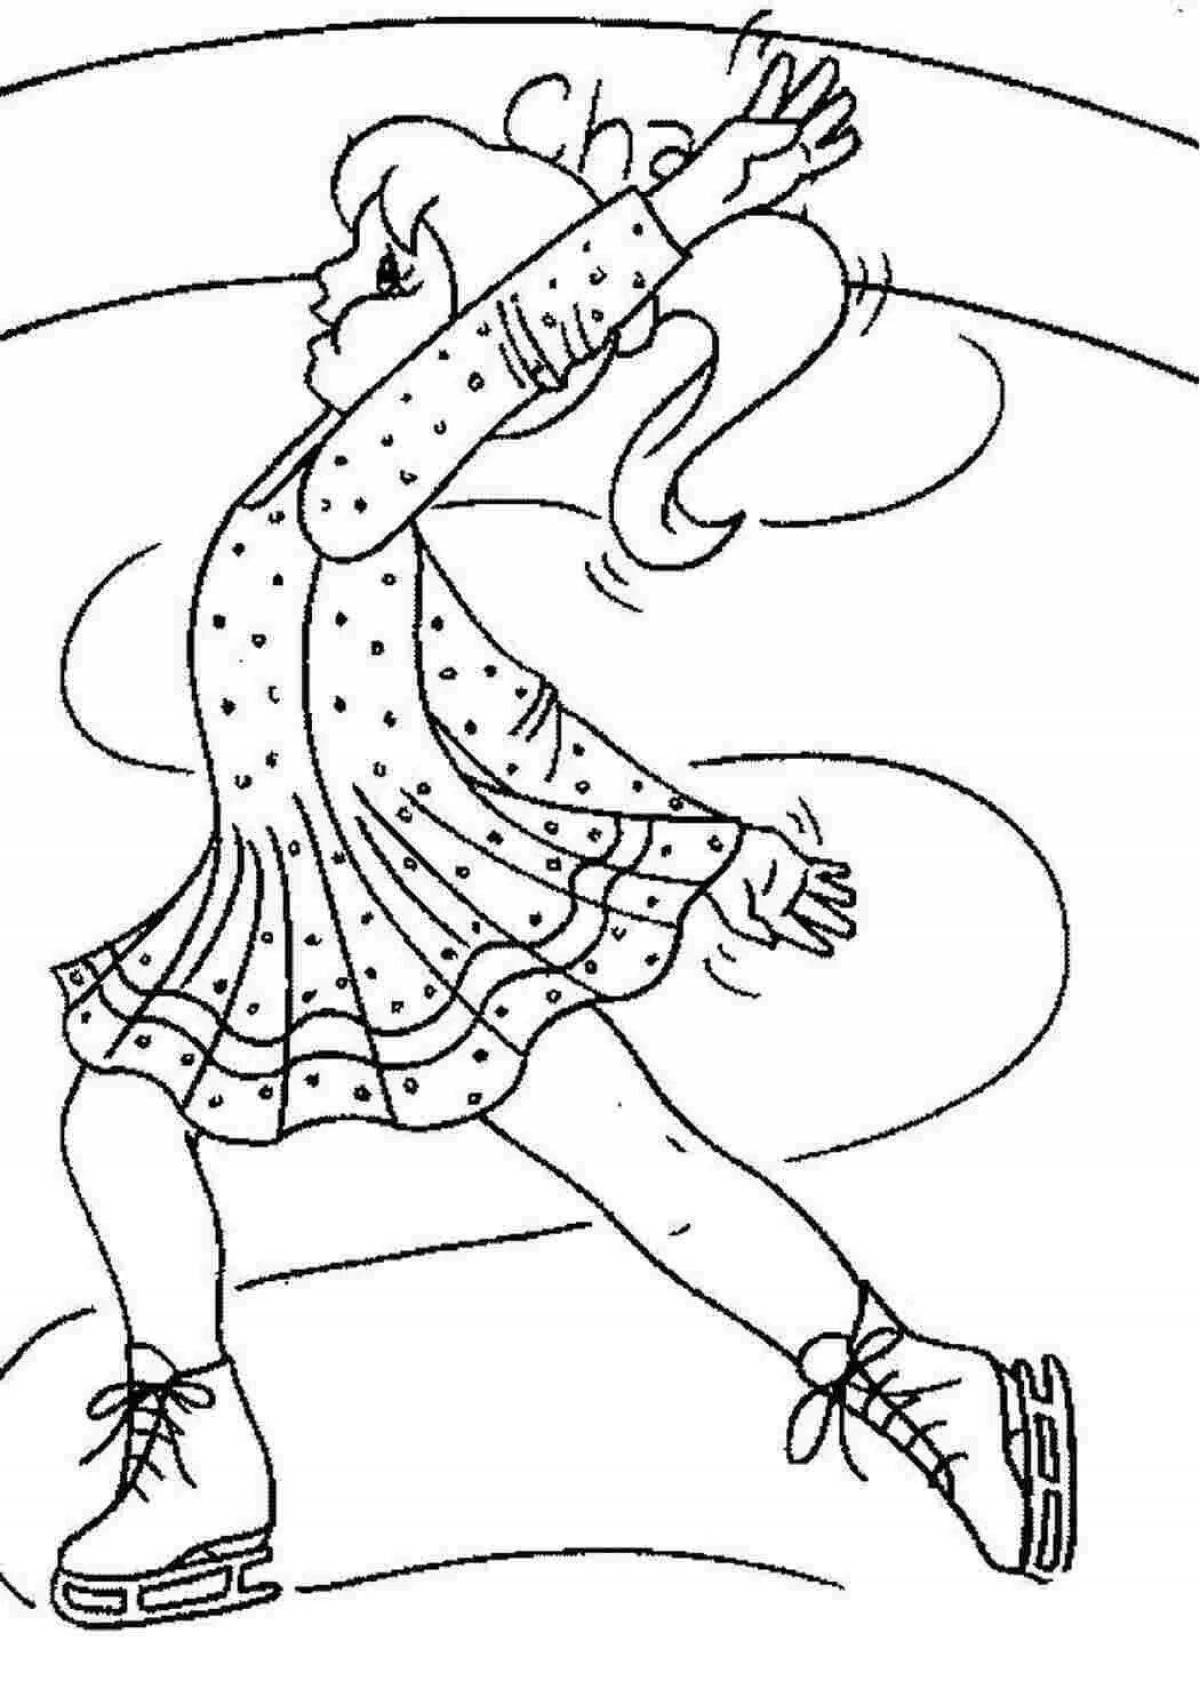 Vivacious coloring page girl figure skater